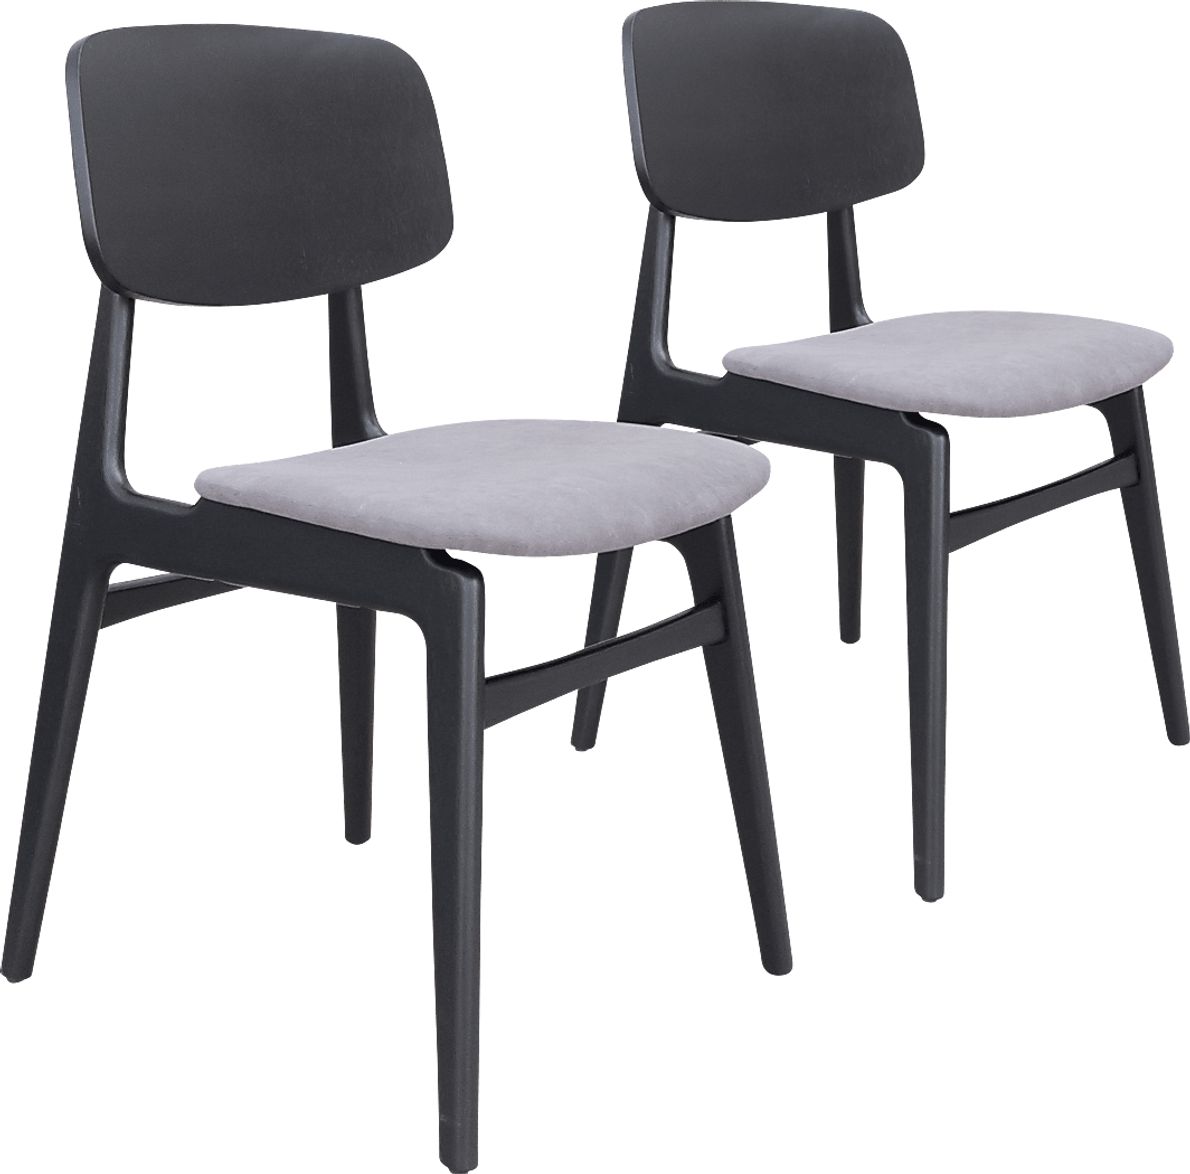 Anacosta Black Dining Chair, Set of 2